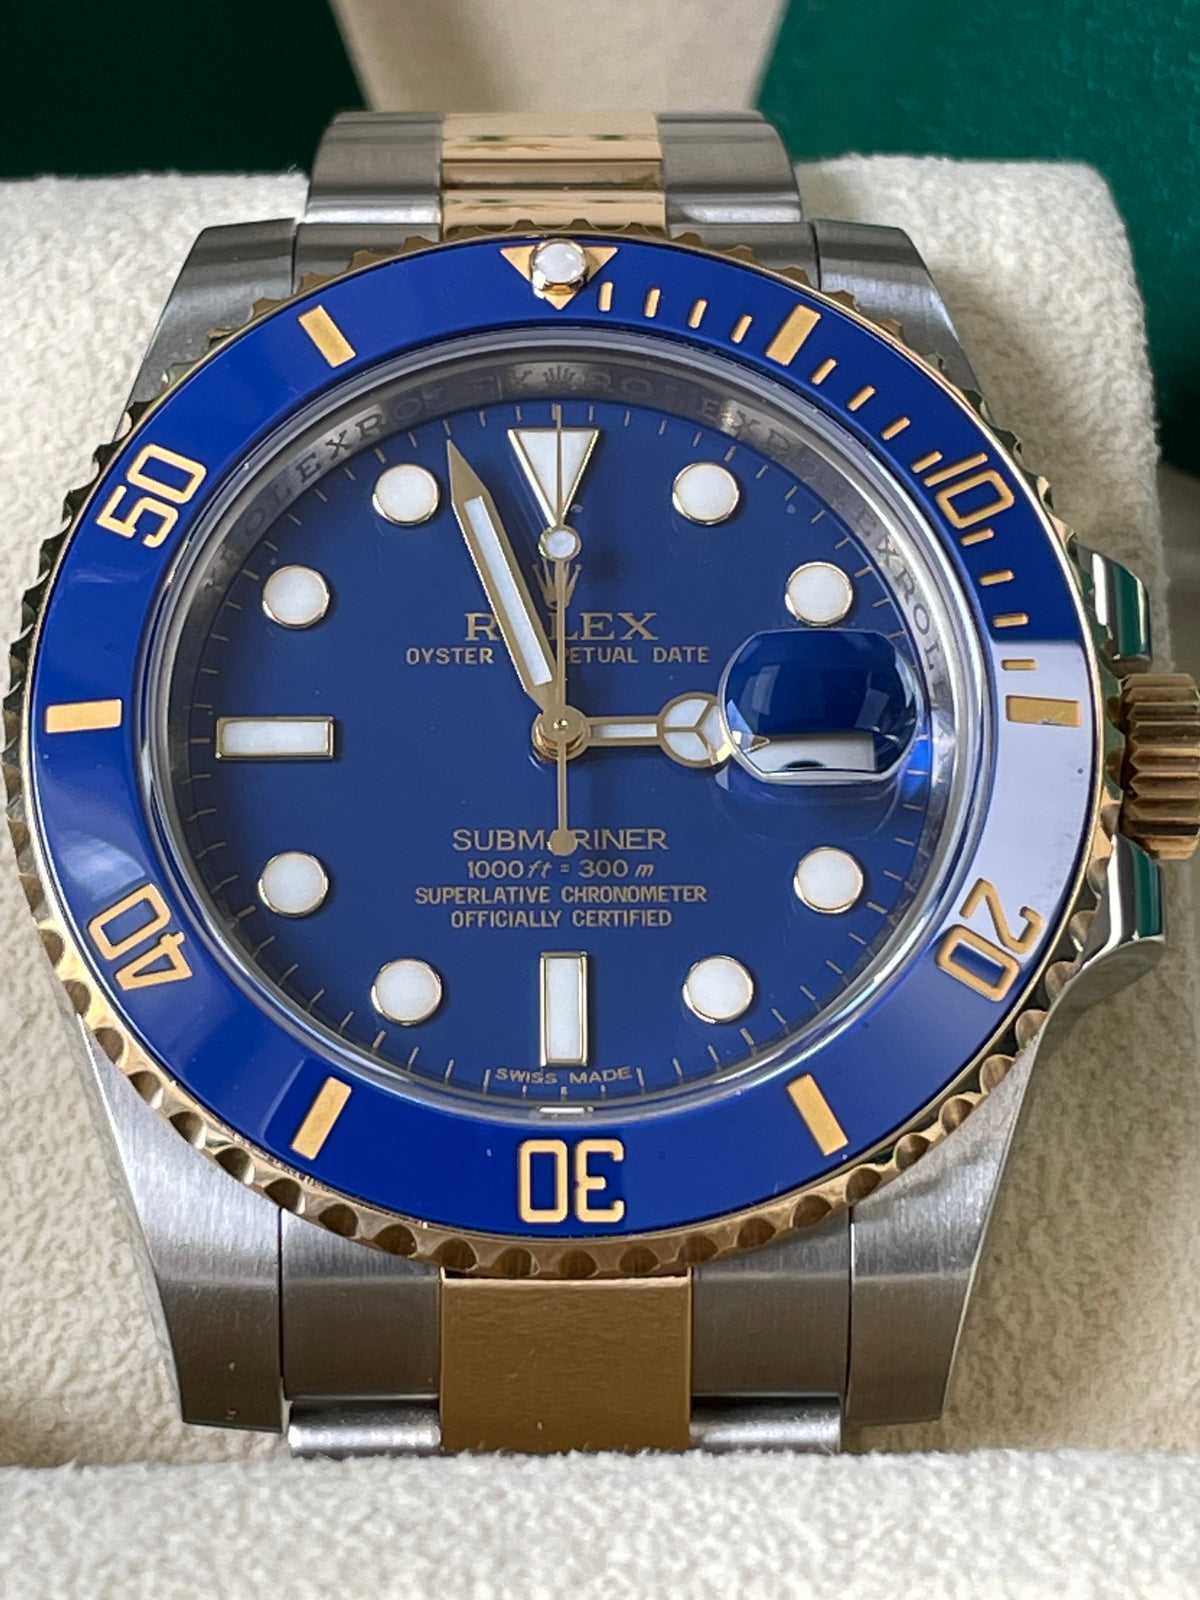 Rolex Steel and Gold Submariner Date - G Serial - Flat Blue Dial - 116613LB